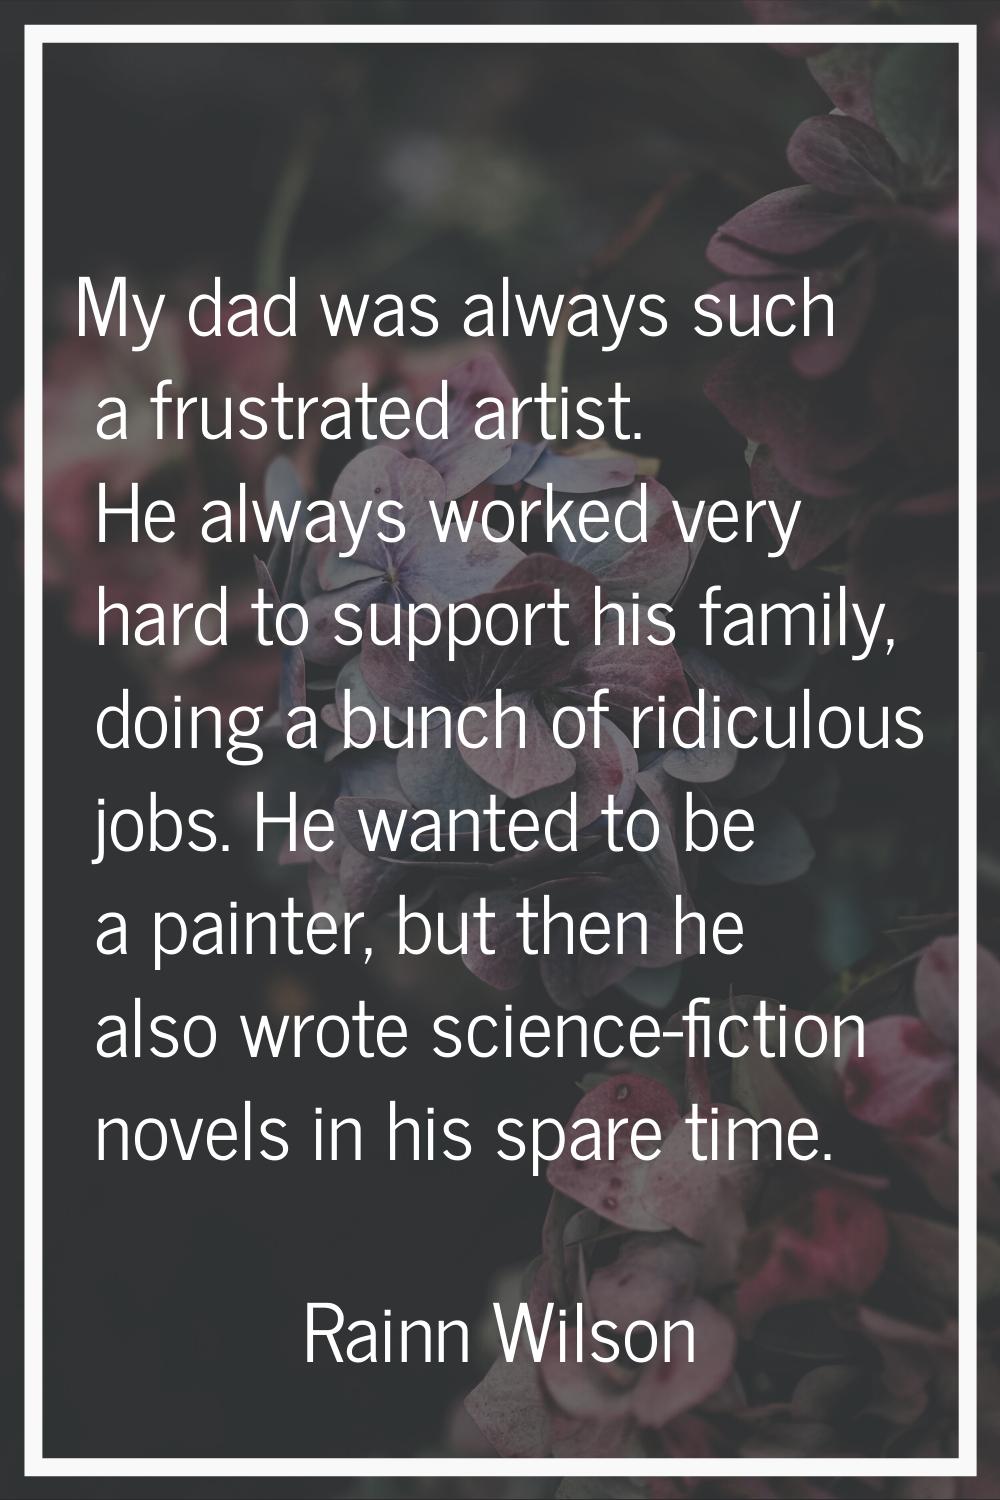 My dad was always such a frustrated artist. He always worked very hard to support his family, doing